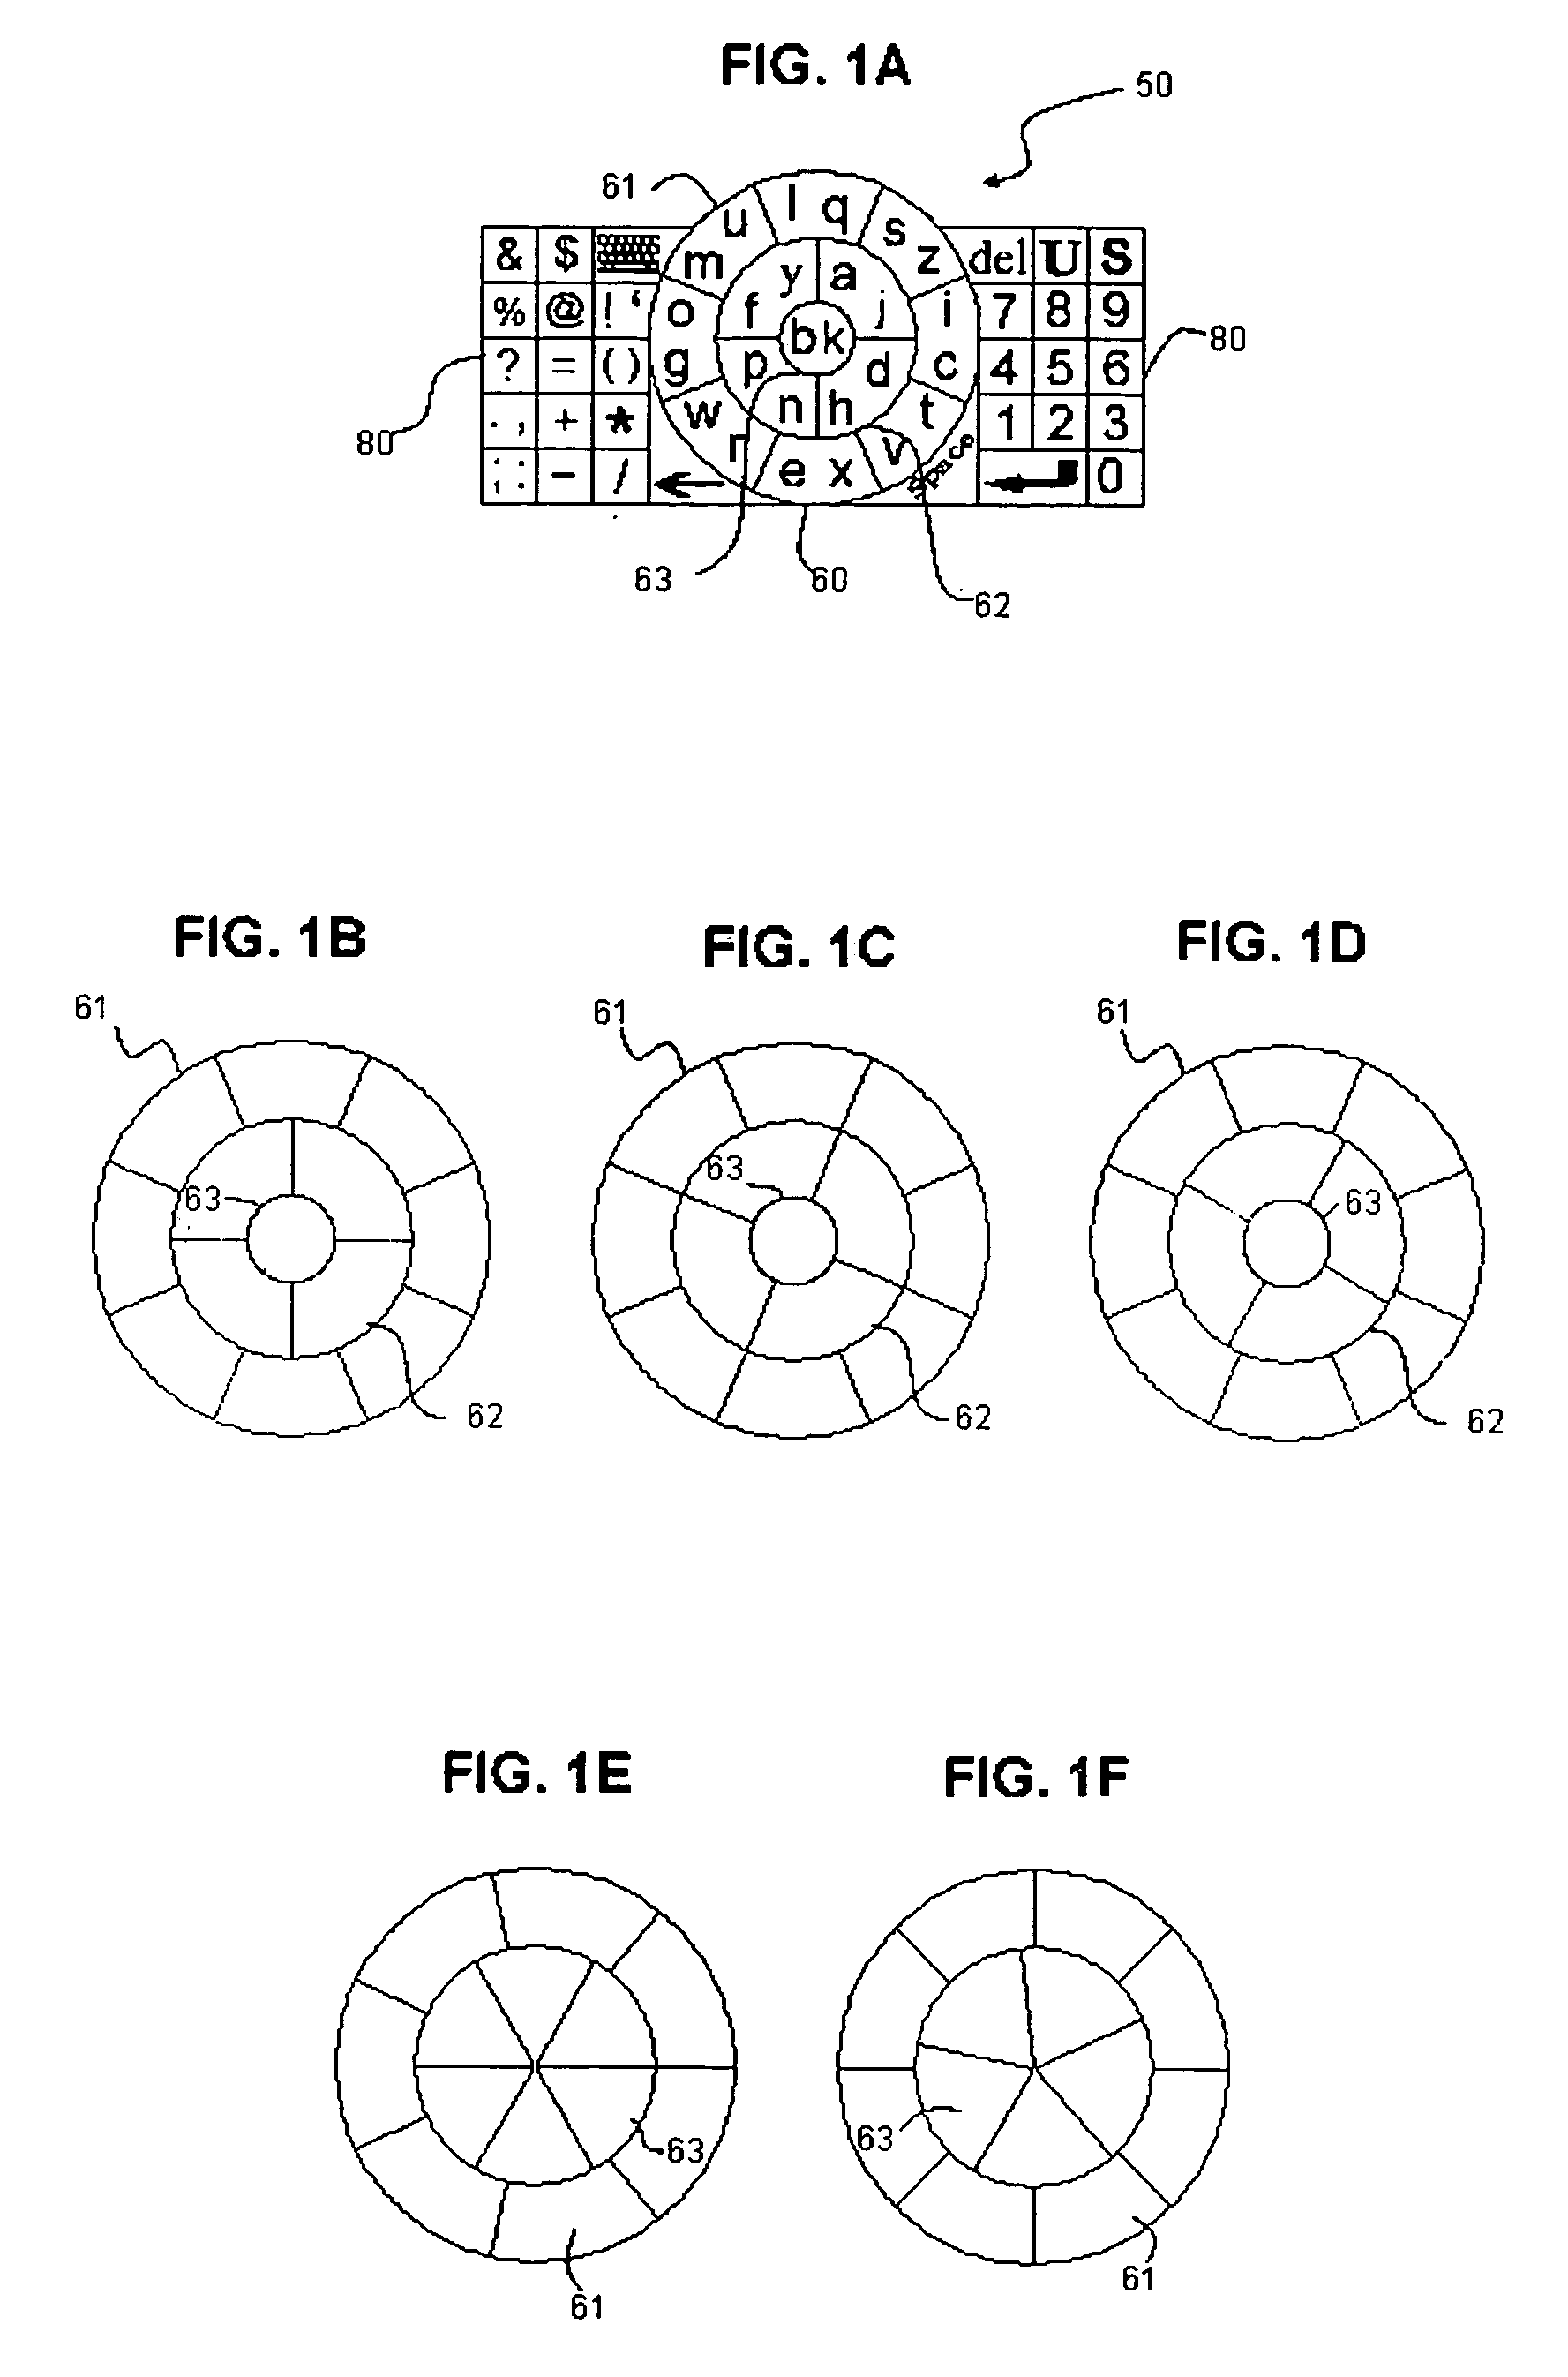 Reduced keyboards system using unistroke input and having automatic disambiguating and a recognition method using said system